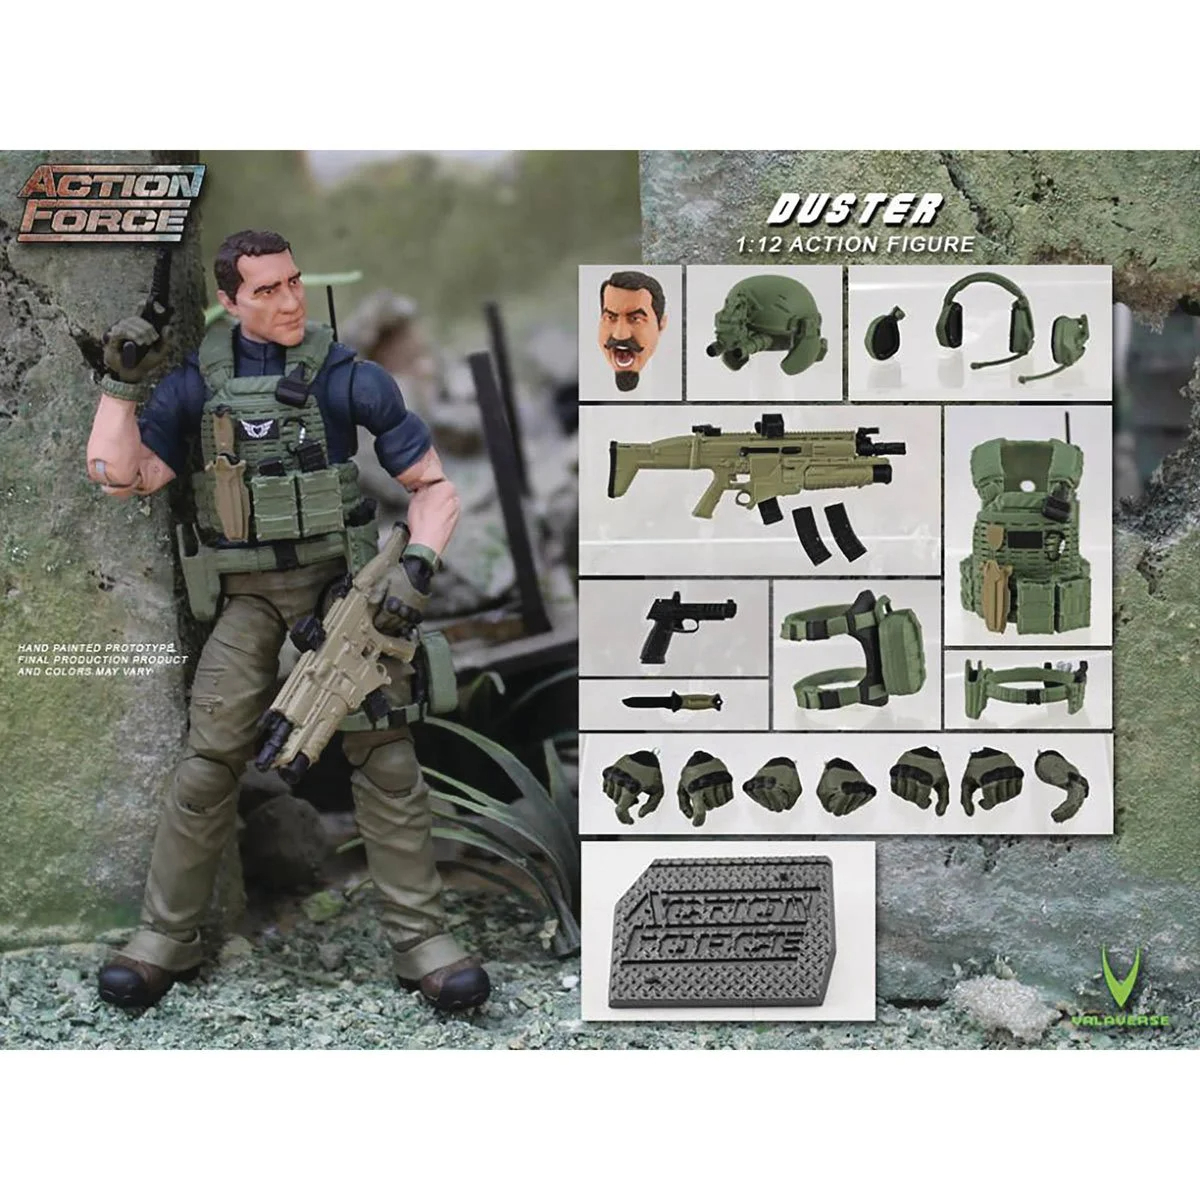 Action Force Series 2 Duster 1:12 Scale Action Figure画像